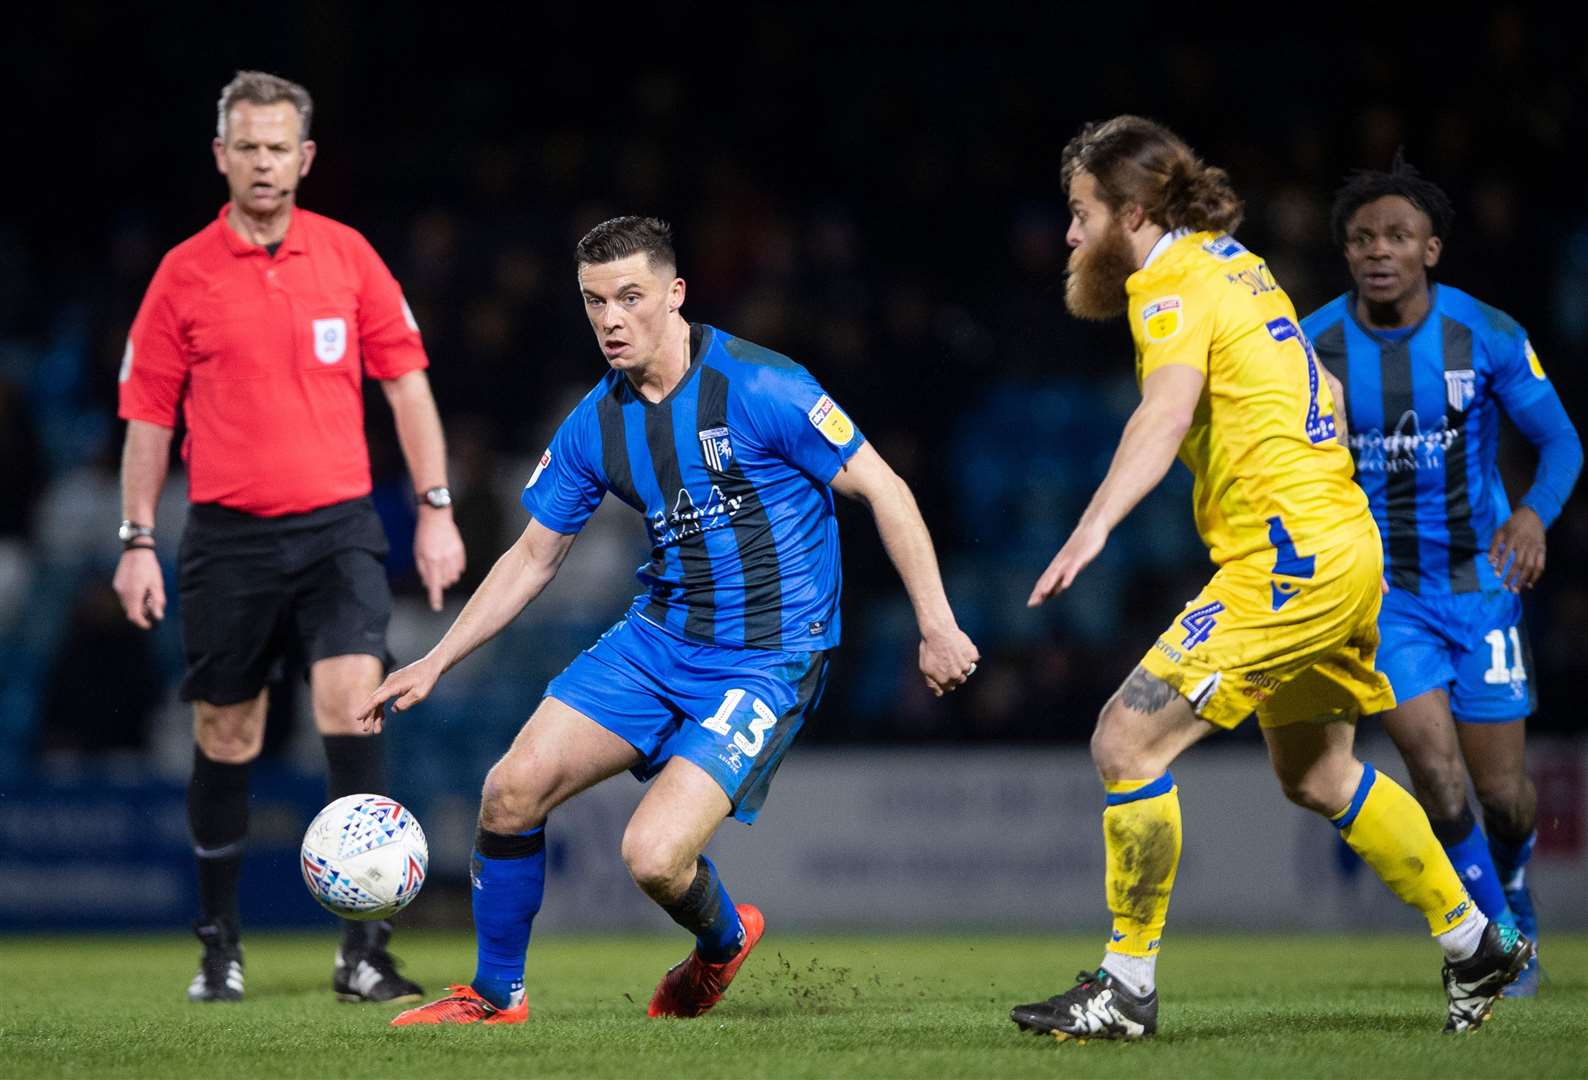 Callum Reilly playing for Gillingham last season against Bristol Rovers Picturee: Ady Kerry